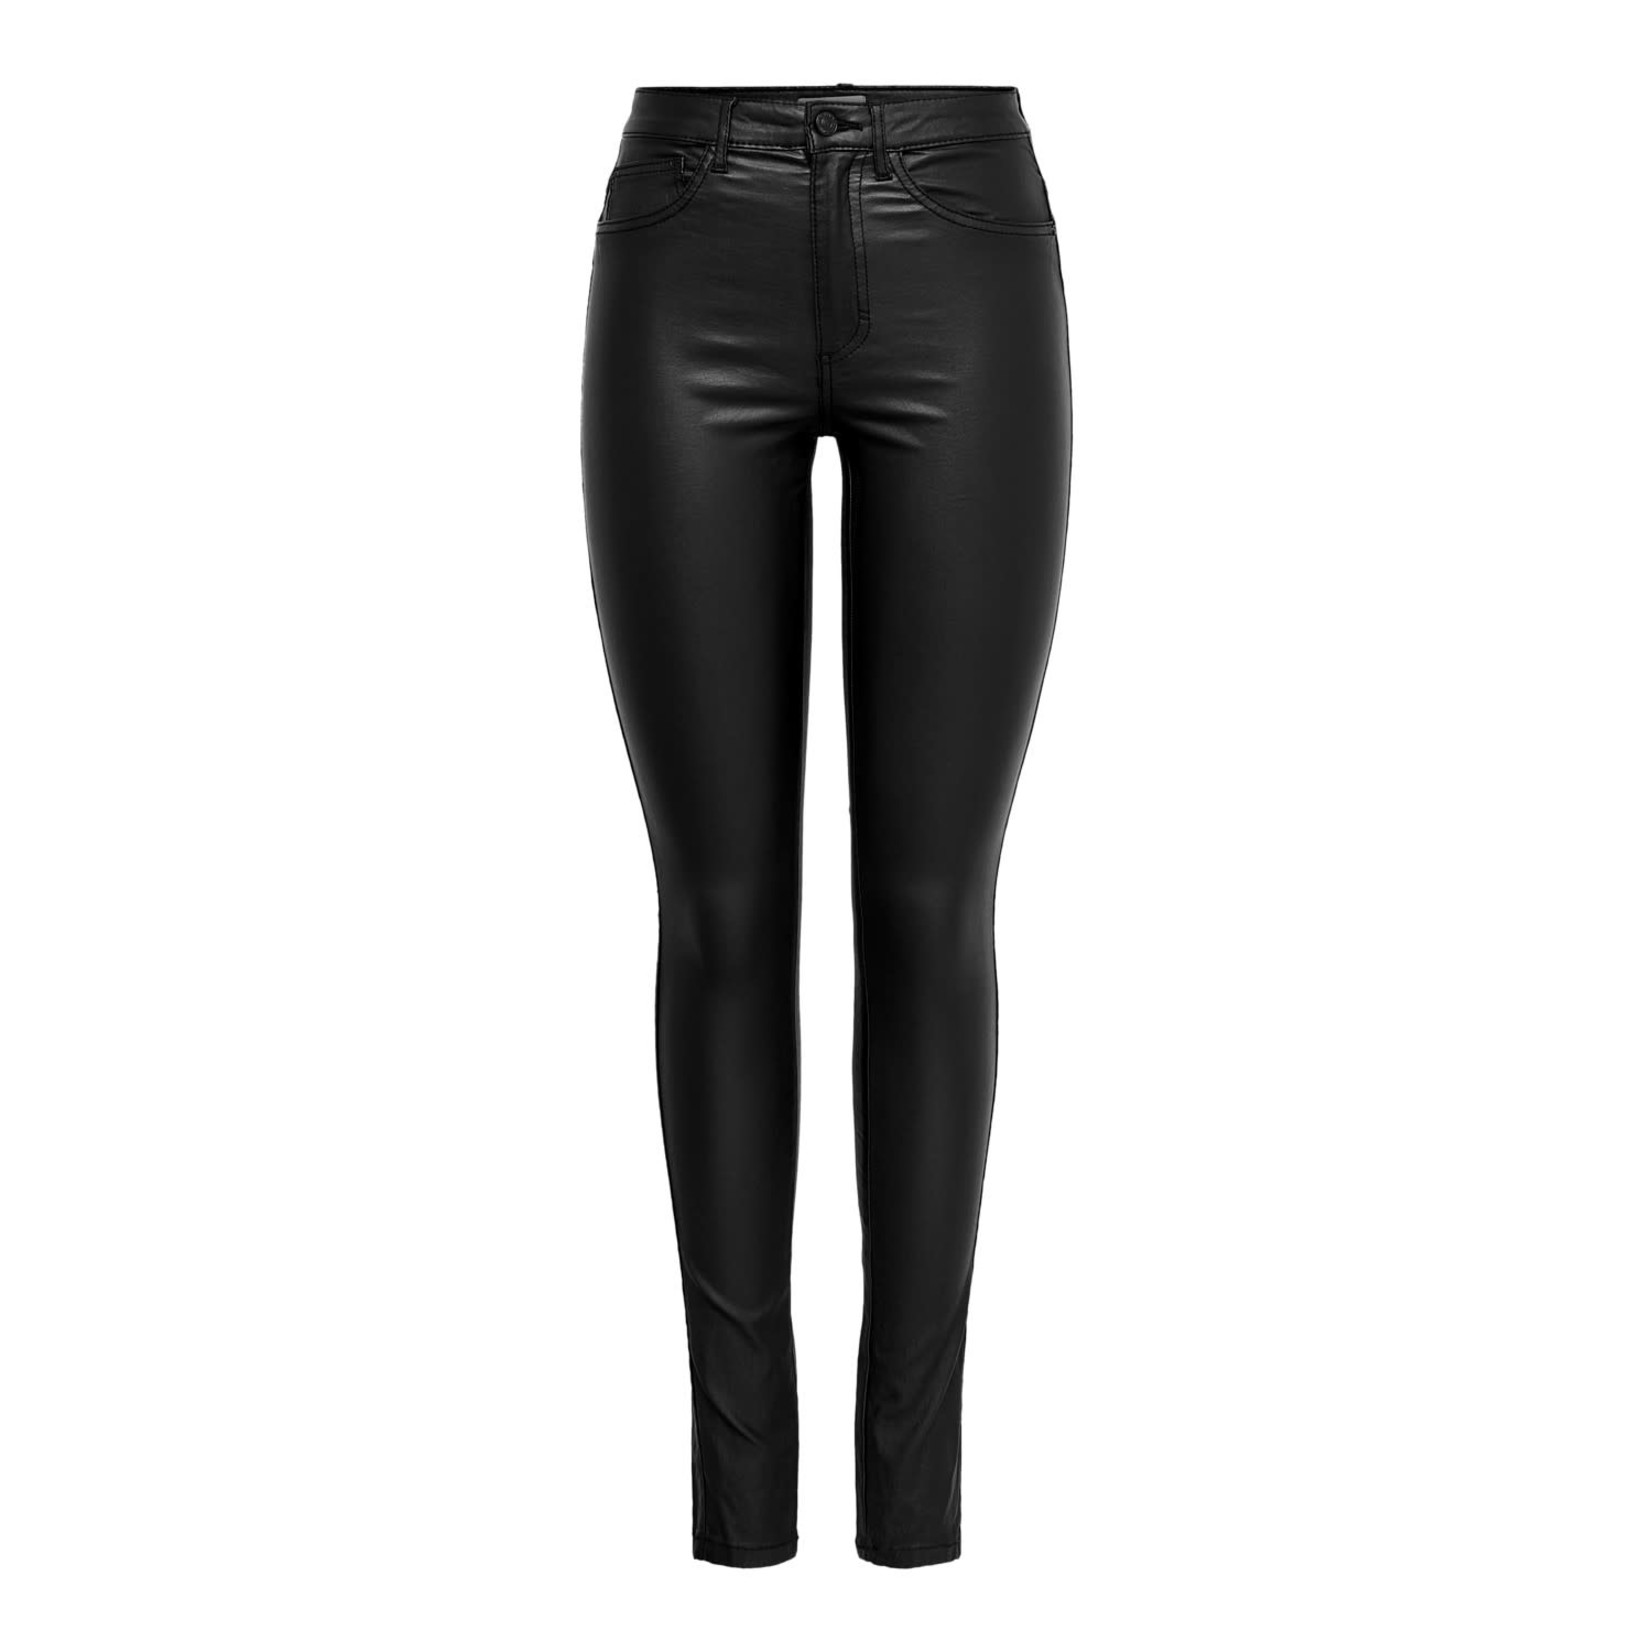 Only Leatherlook Black , gecoate jeans